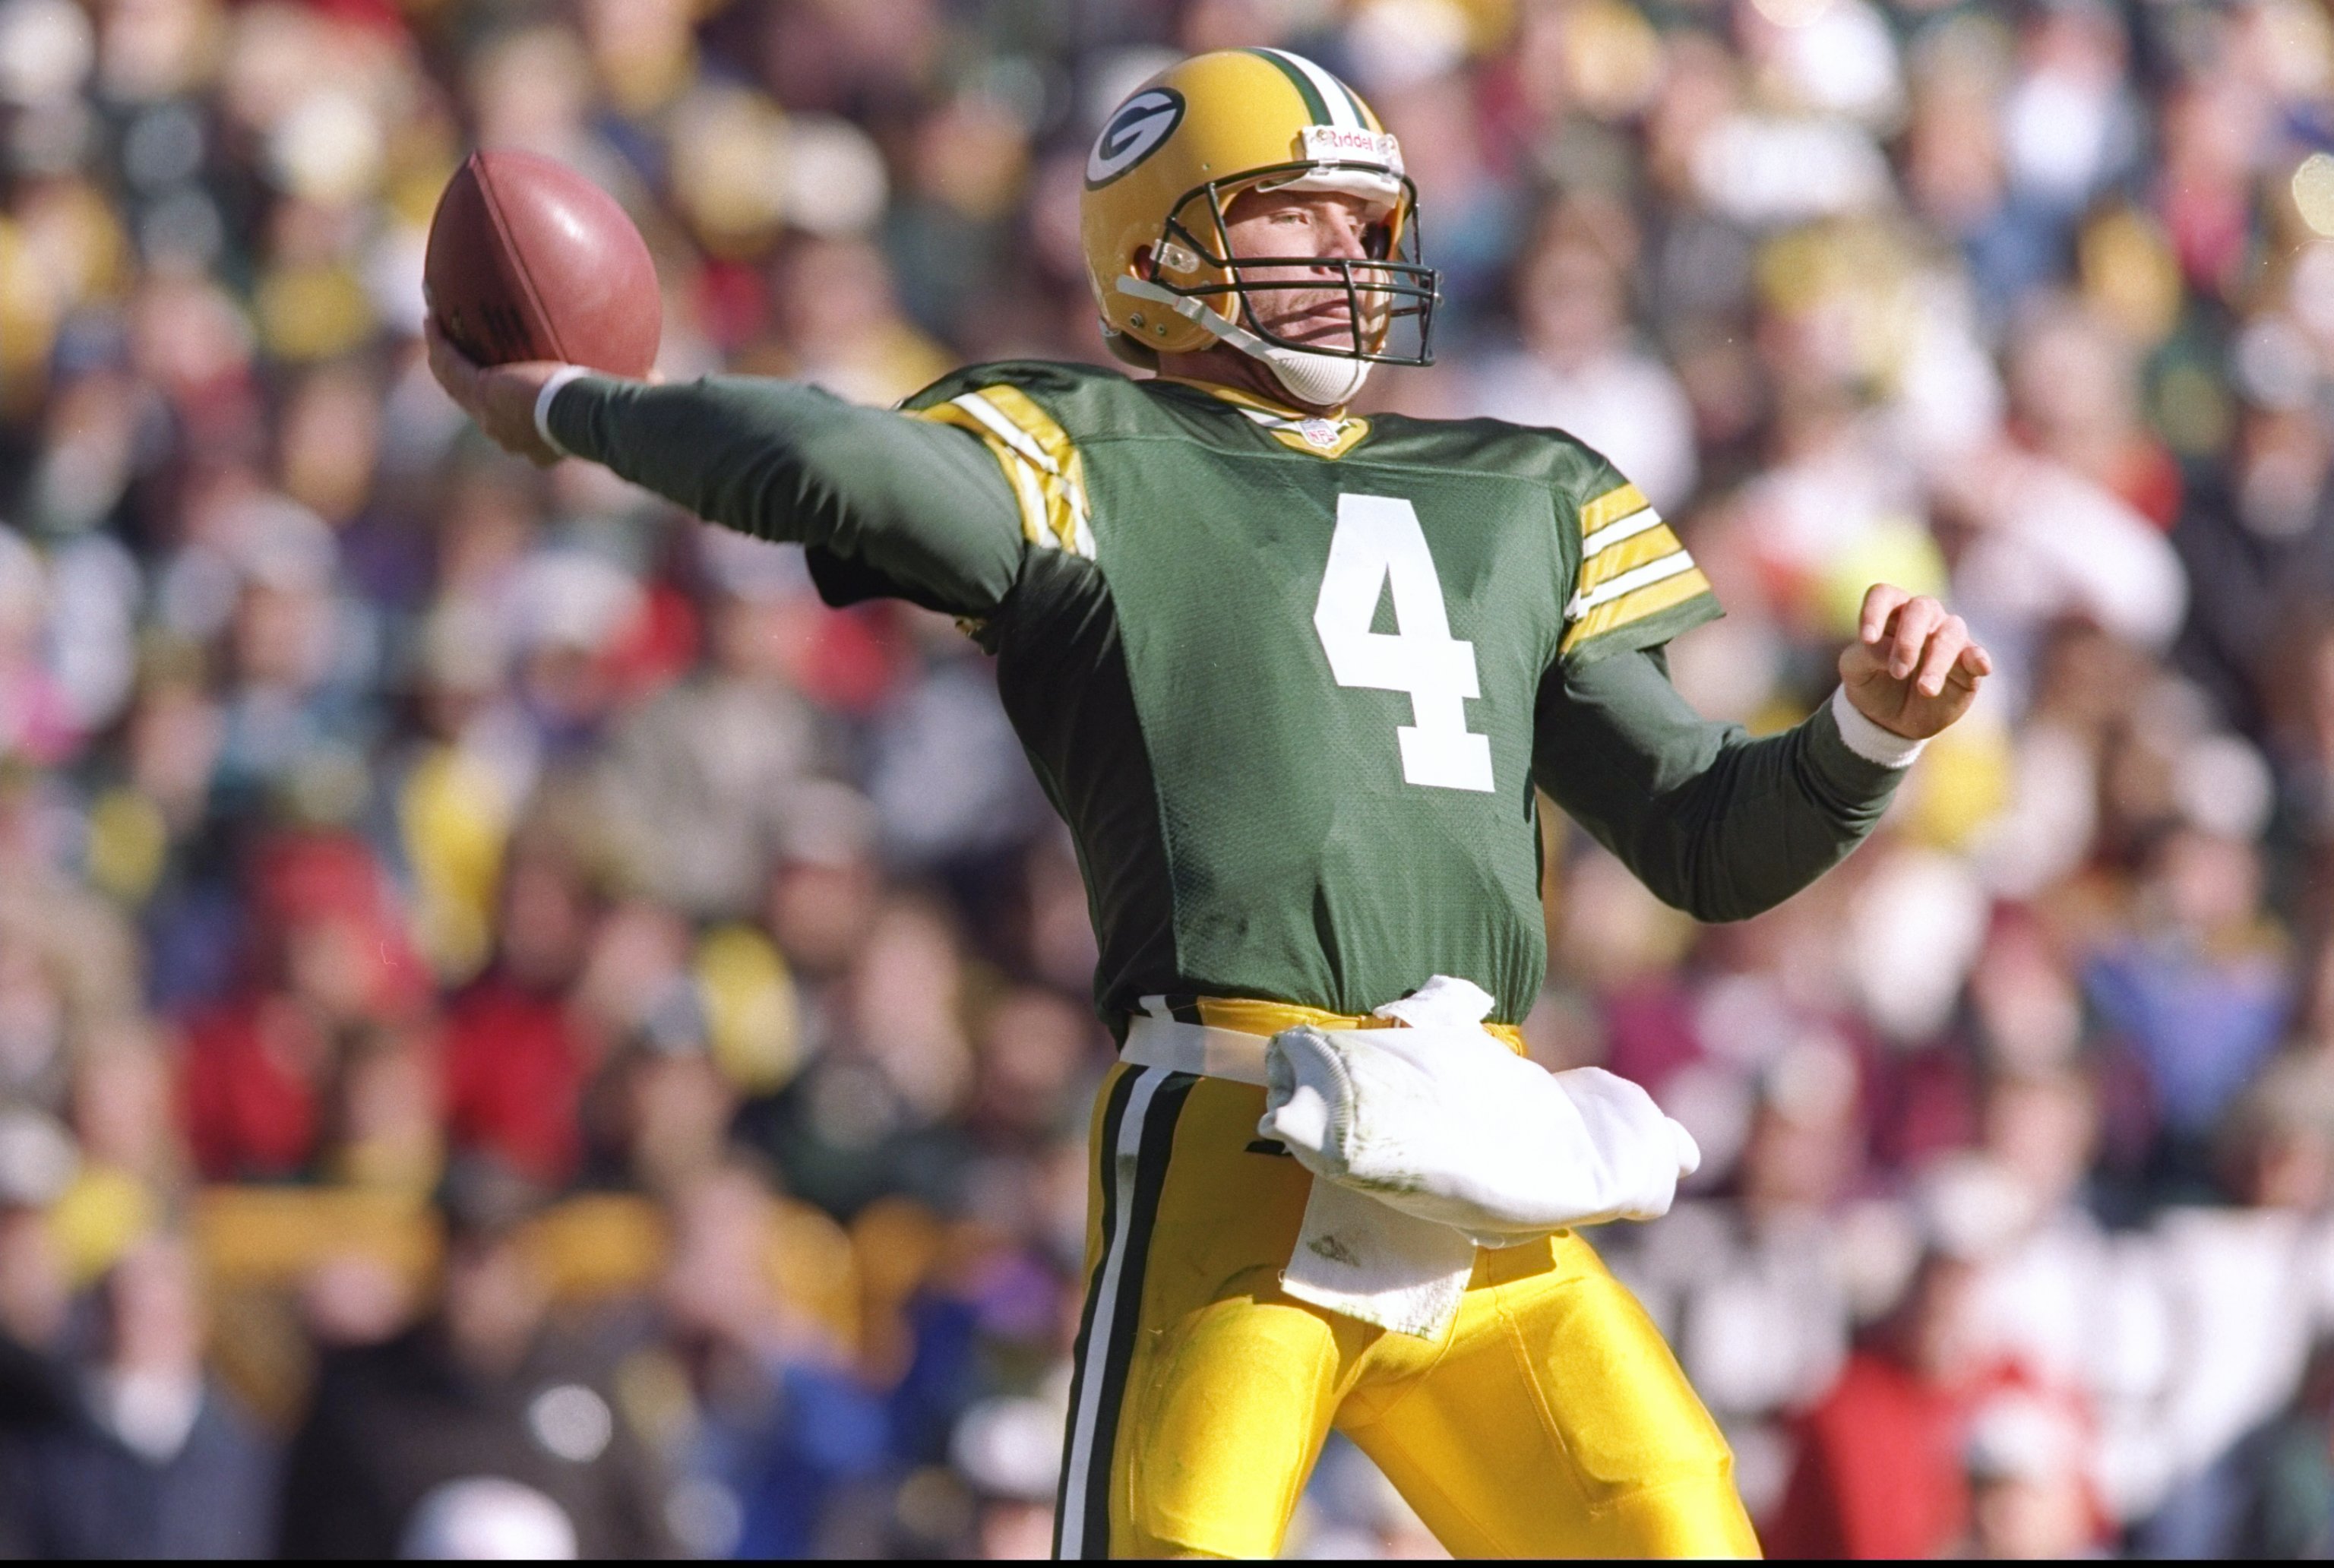 Brett Favre started a record 297 straight games at quarterback in the NFL.